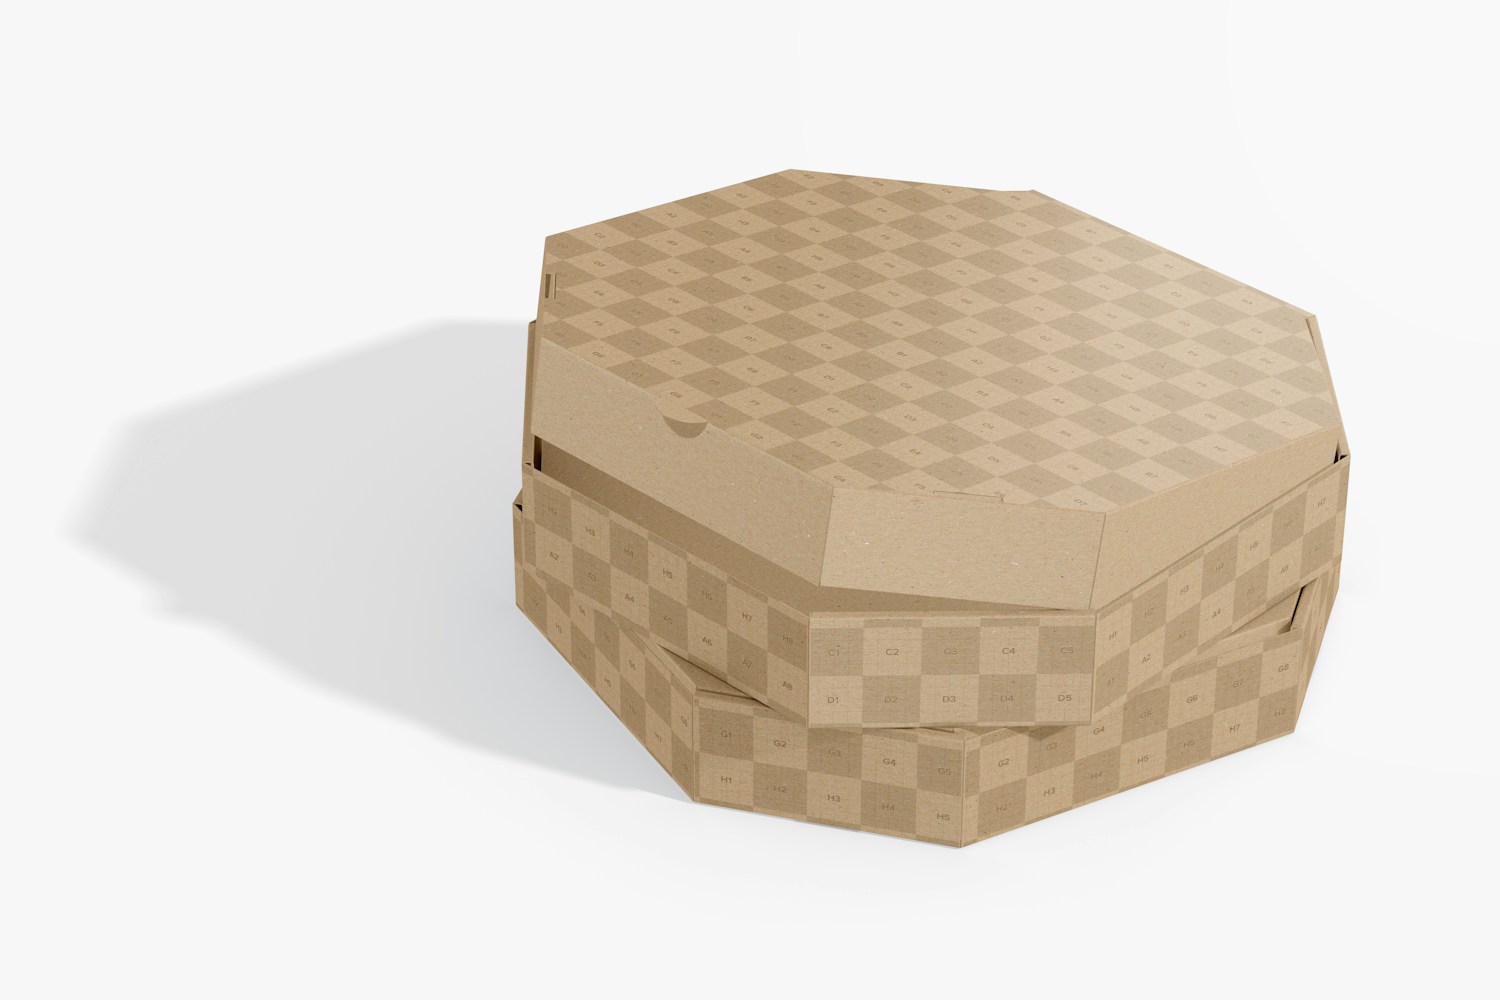 Octagonal Mailing Boxes Mockup, Stacked